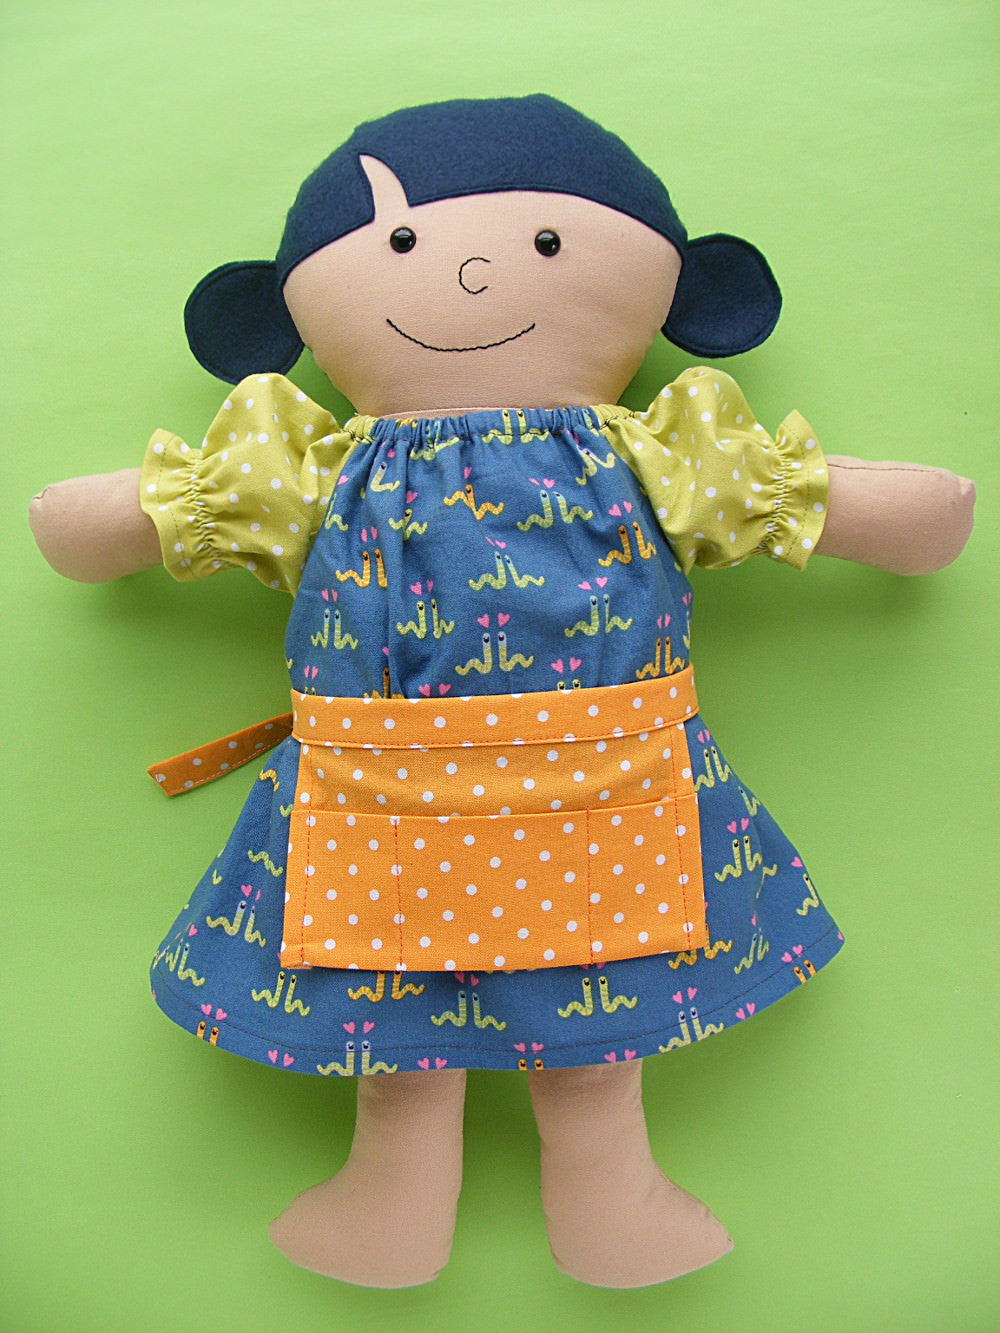 Garden Collection - Dress Up Bunch Doll Dress, Apron and Hat Pattern